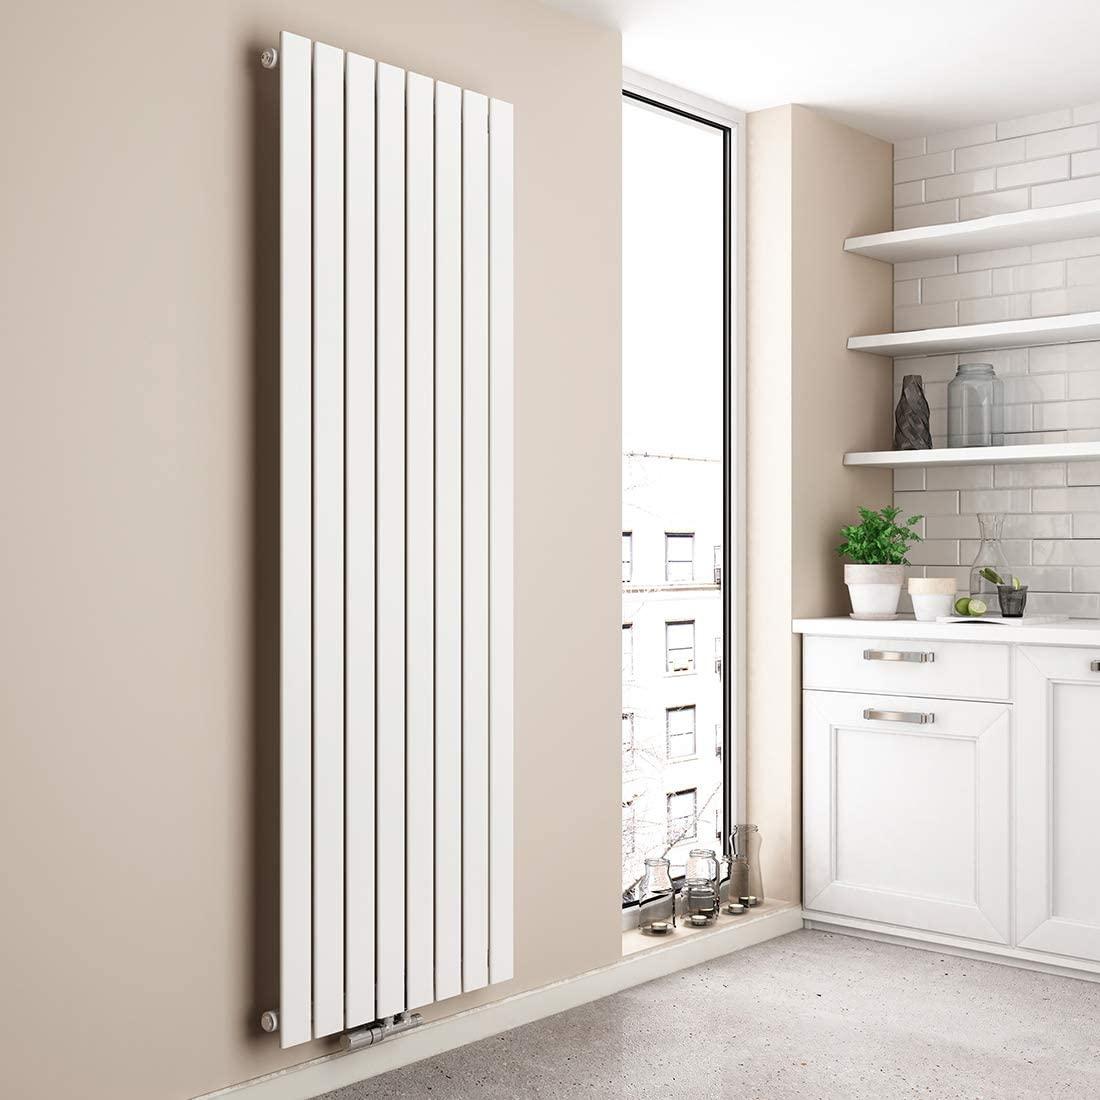 <b>What are the leading suppliers of radiators for central heating (not electrically heated) to the UK?</b>